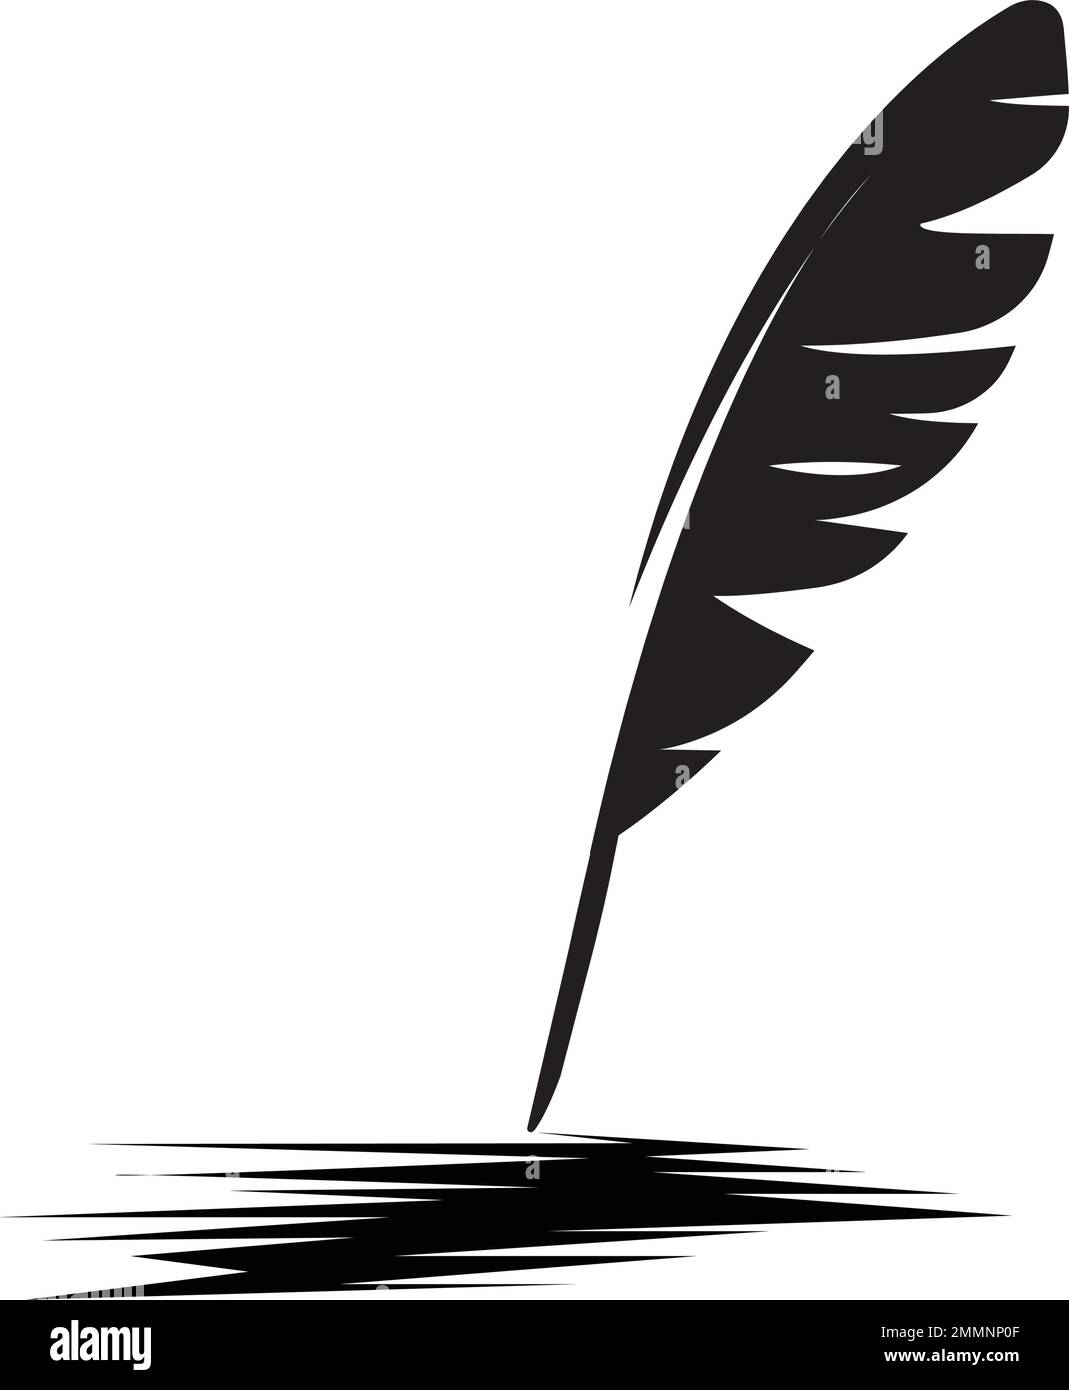 feather quill pen icon,classic stationery illustration. Stock Vector